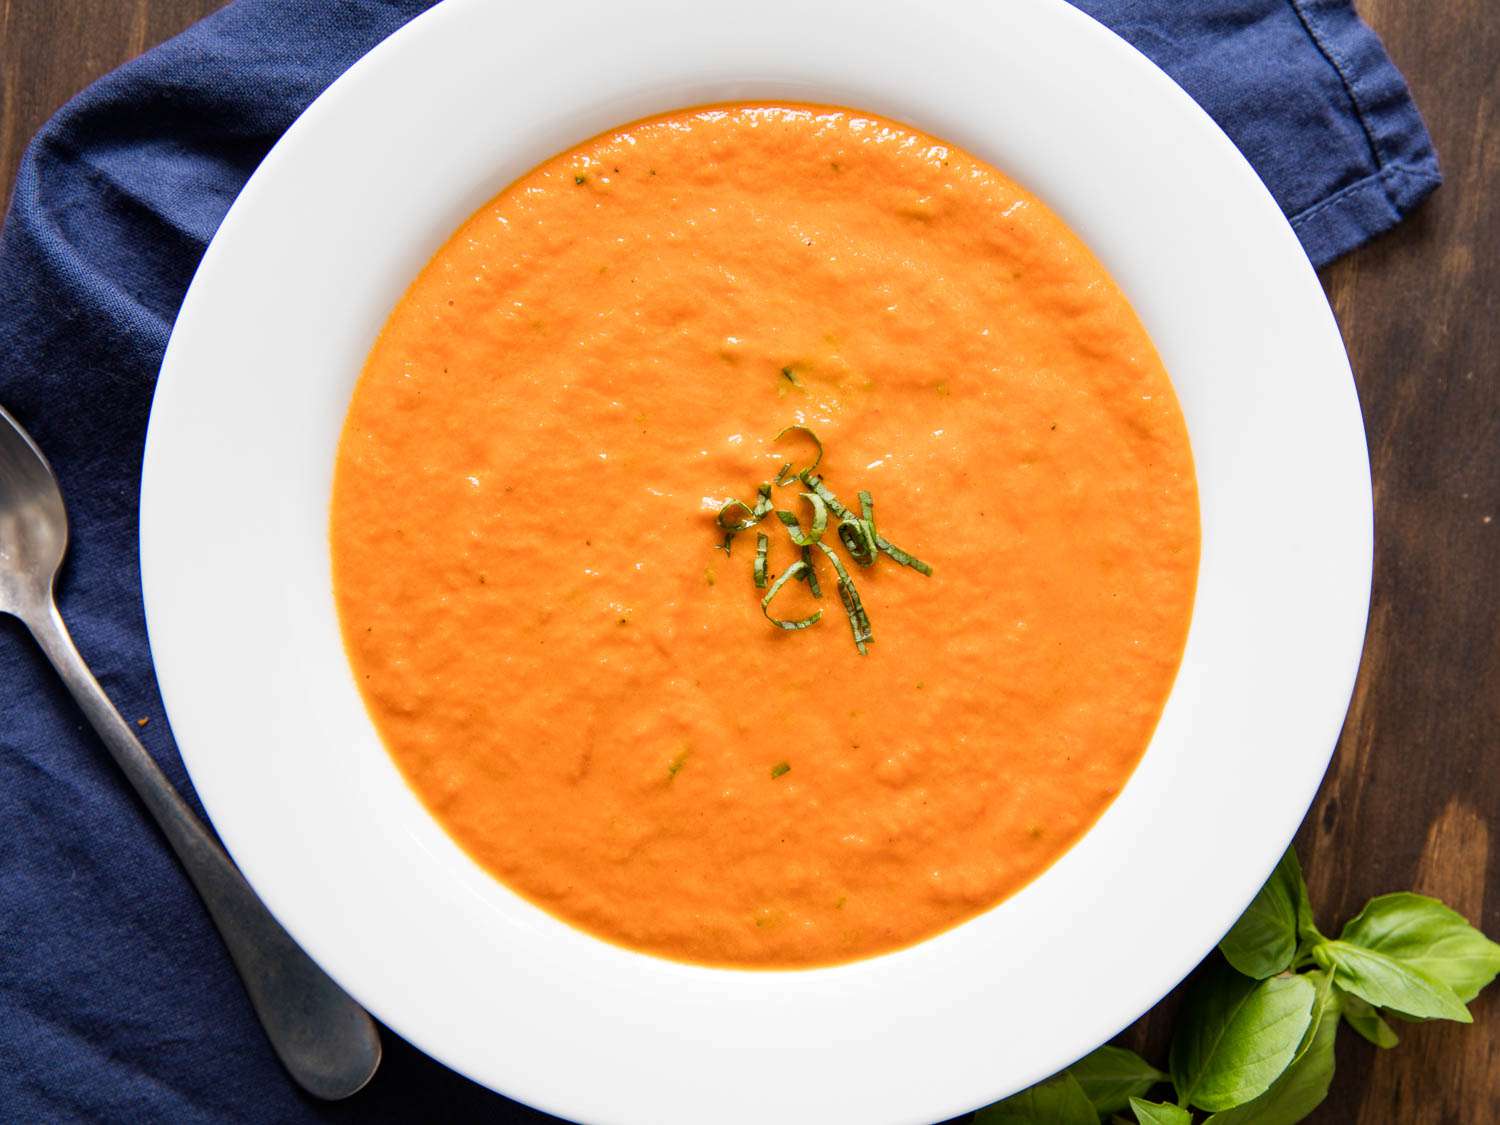 Overhead shot of bowl of thick, creamy tomato soup garnished with basil